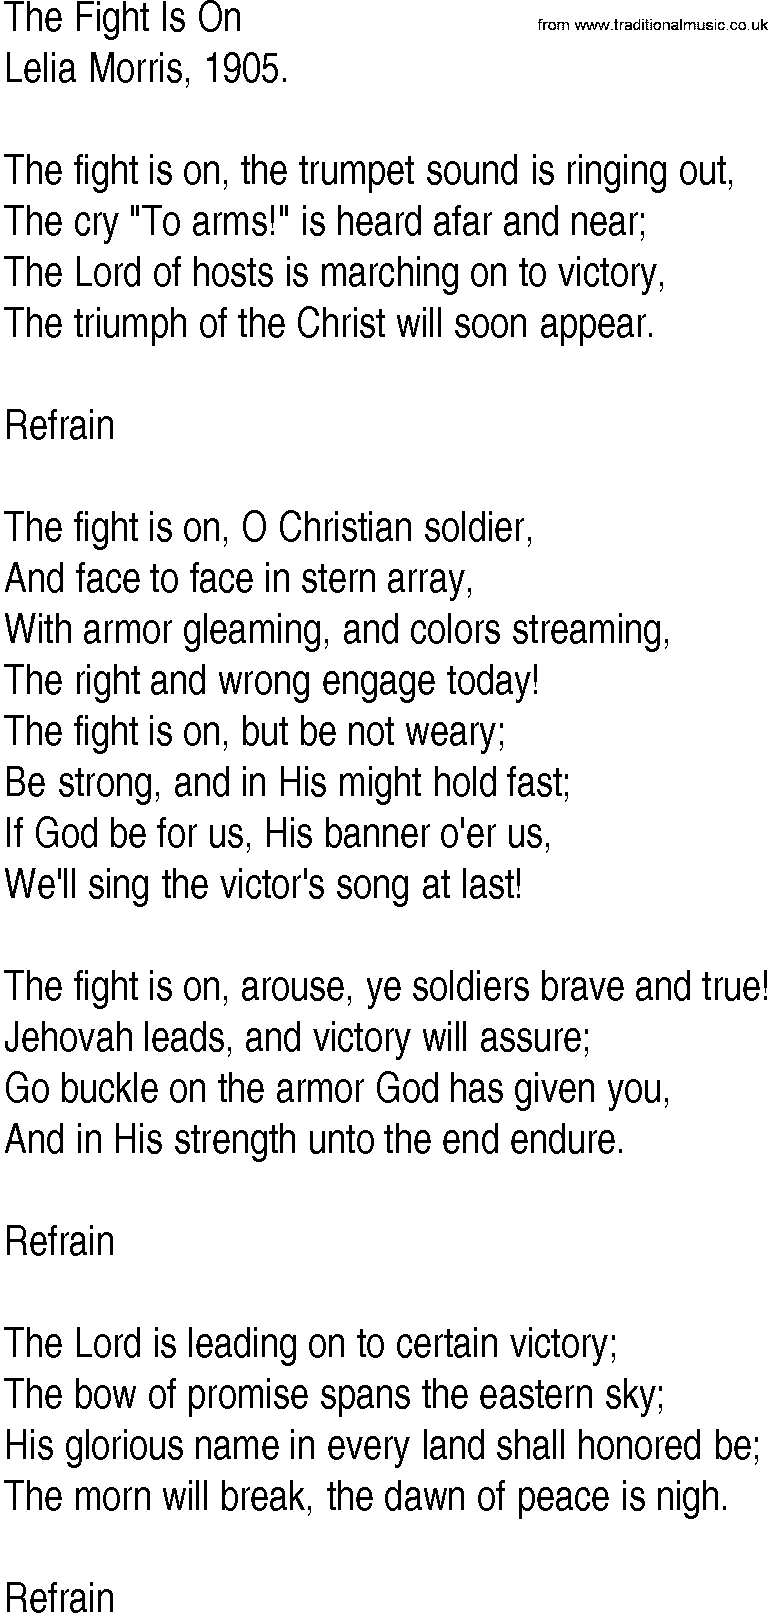 Hymn and Gospel Song: The Fight Is On by Lelia Morris lyrics